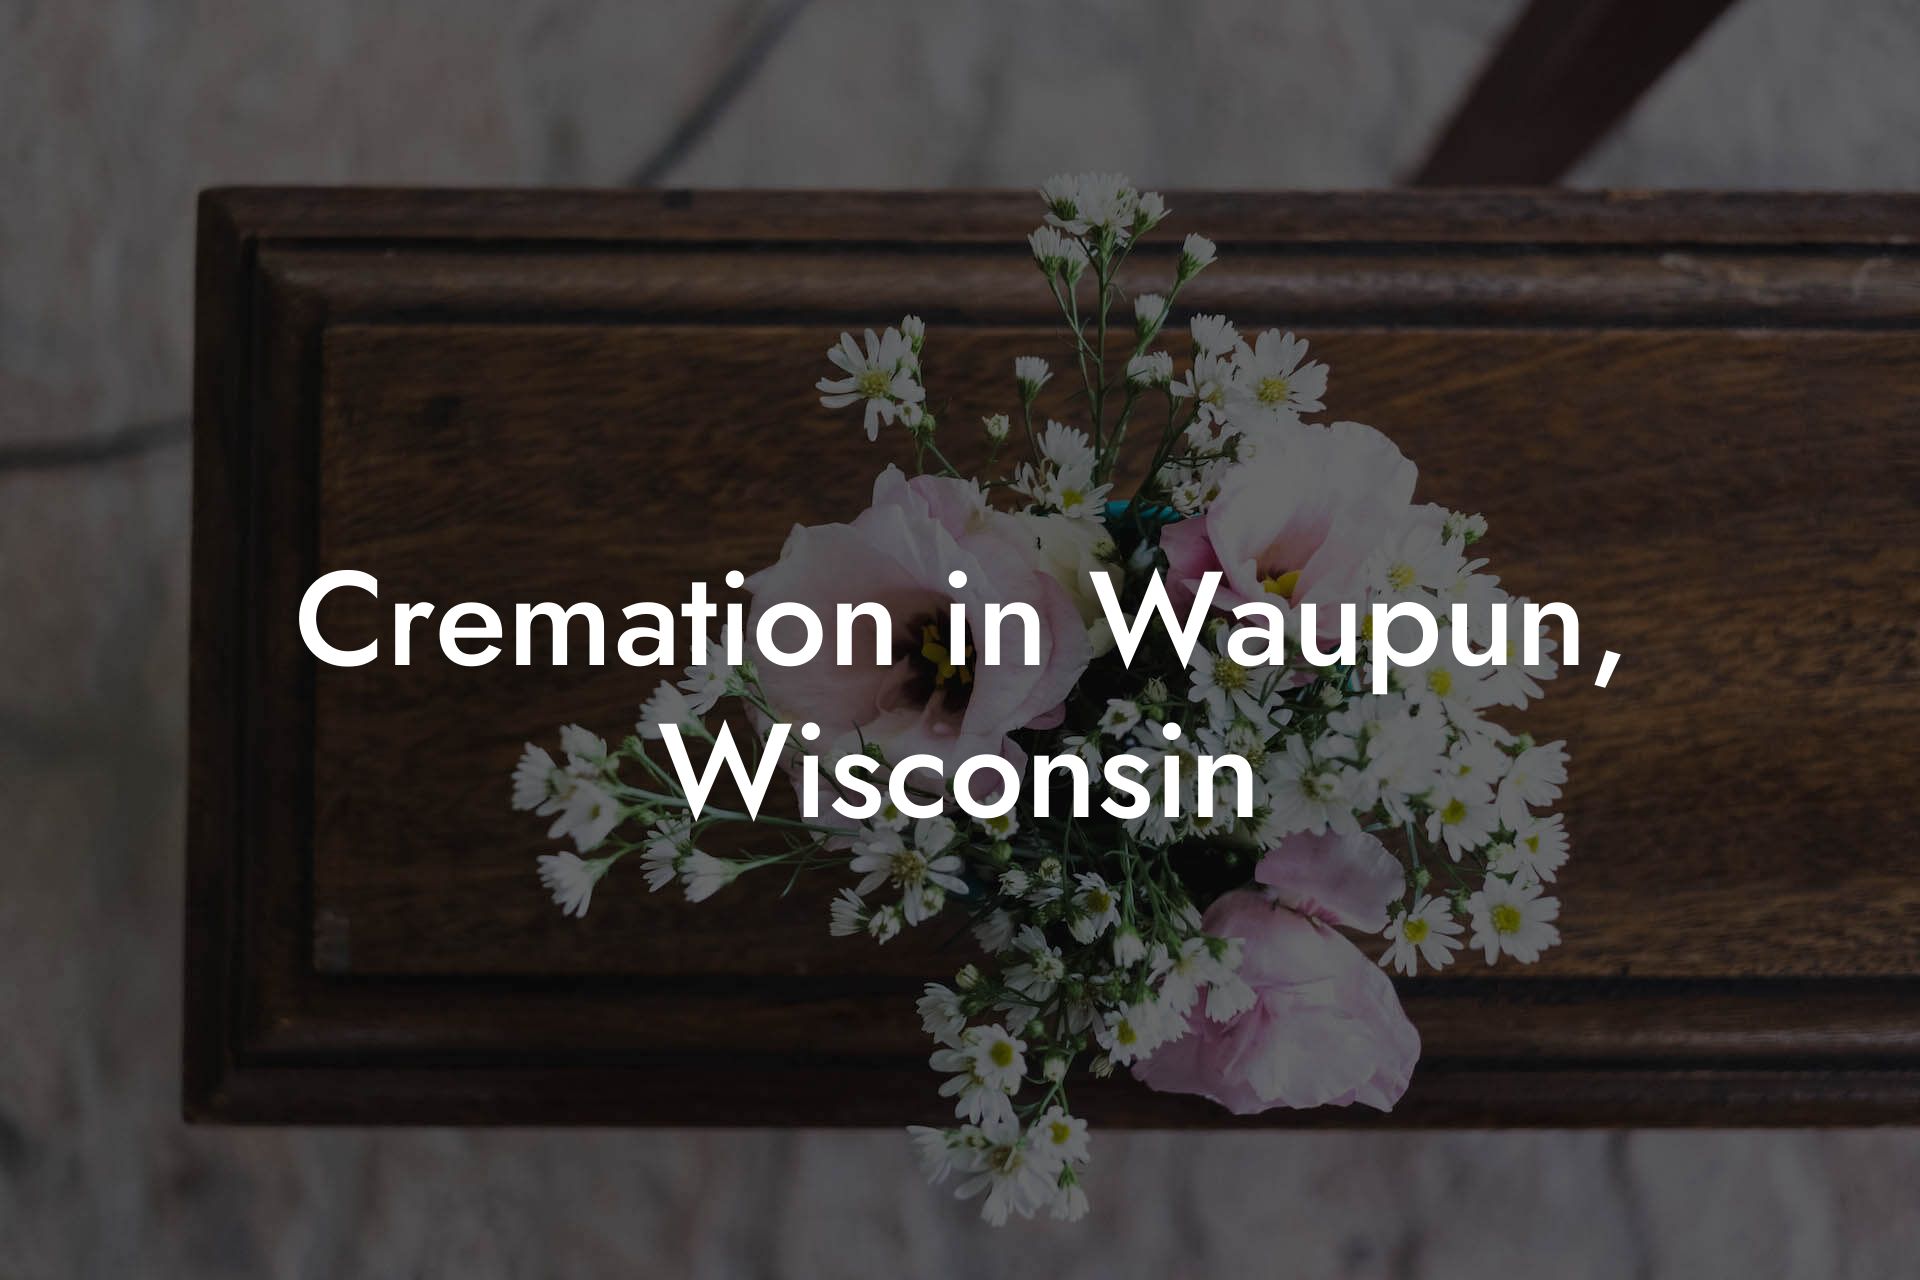 Cremation in Waupun, Wisconsin